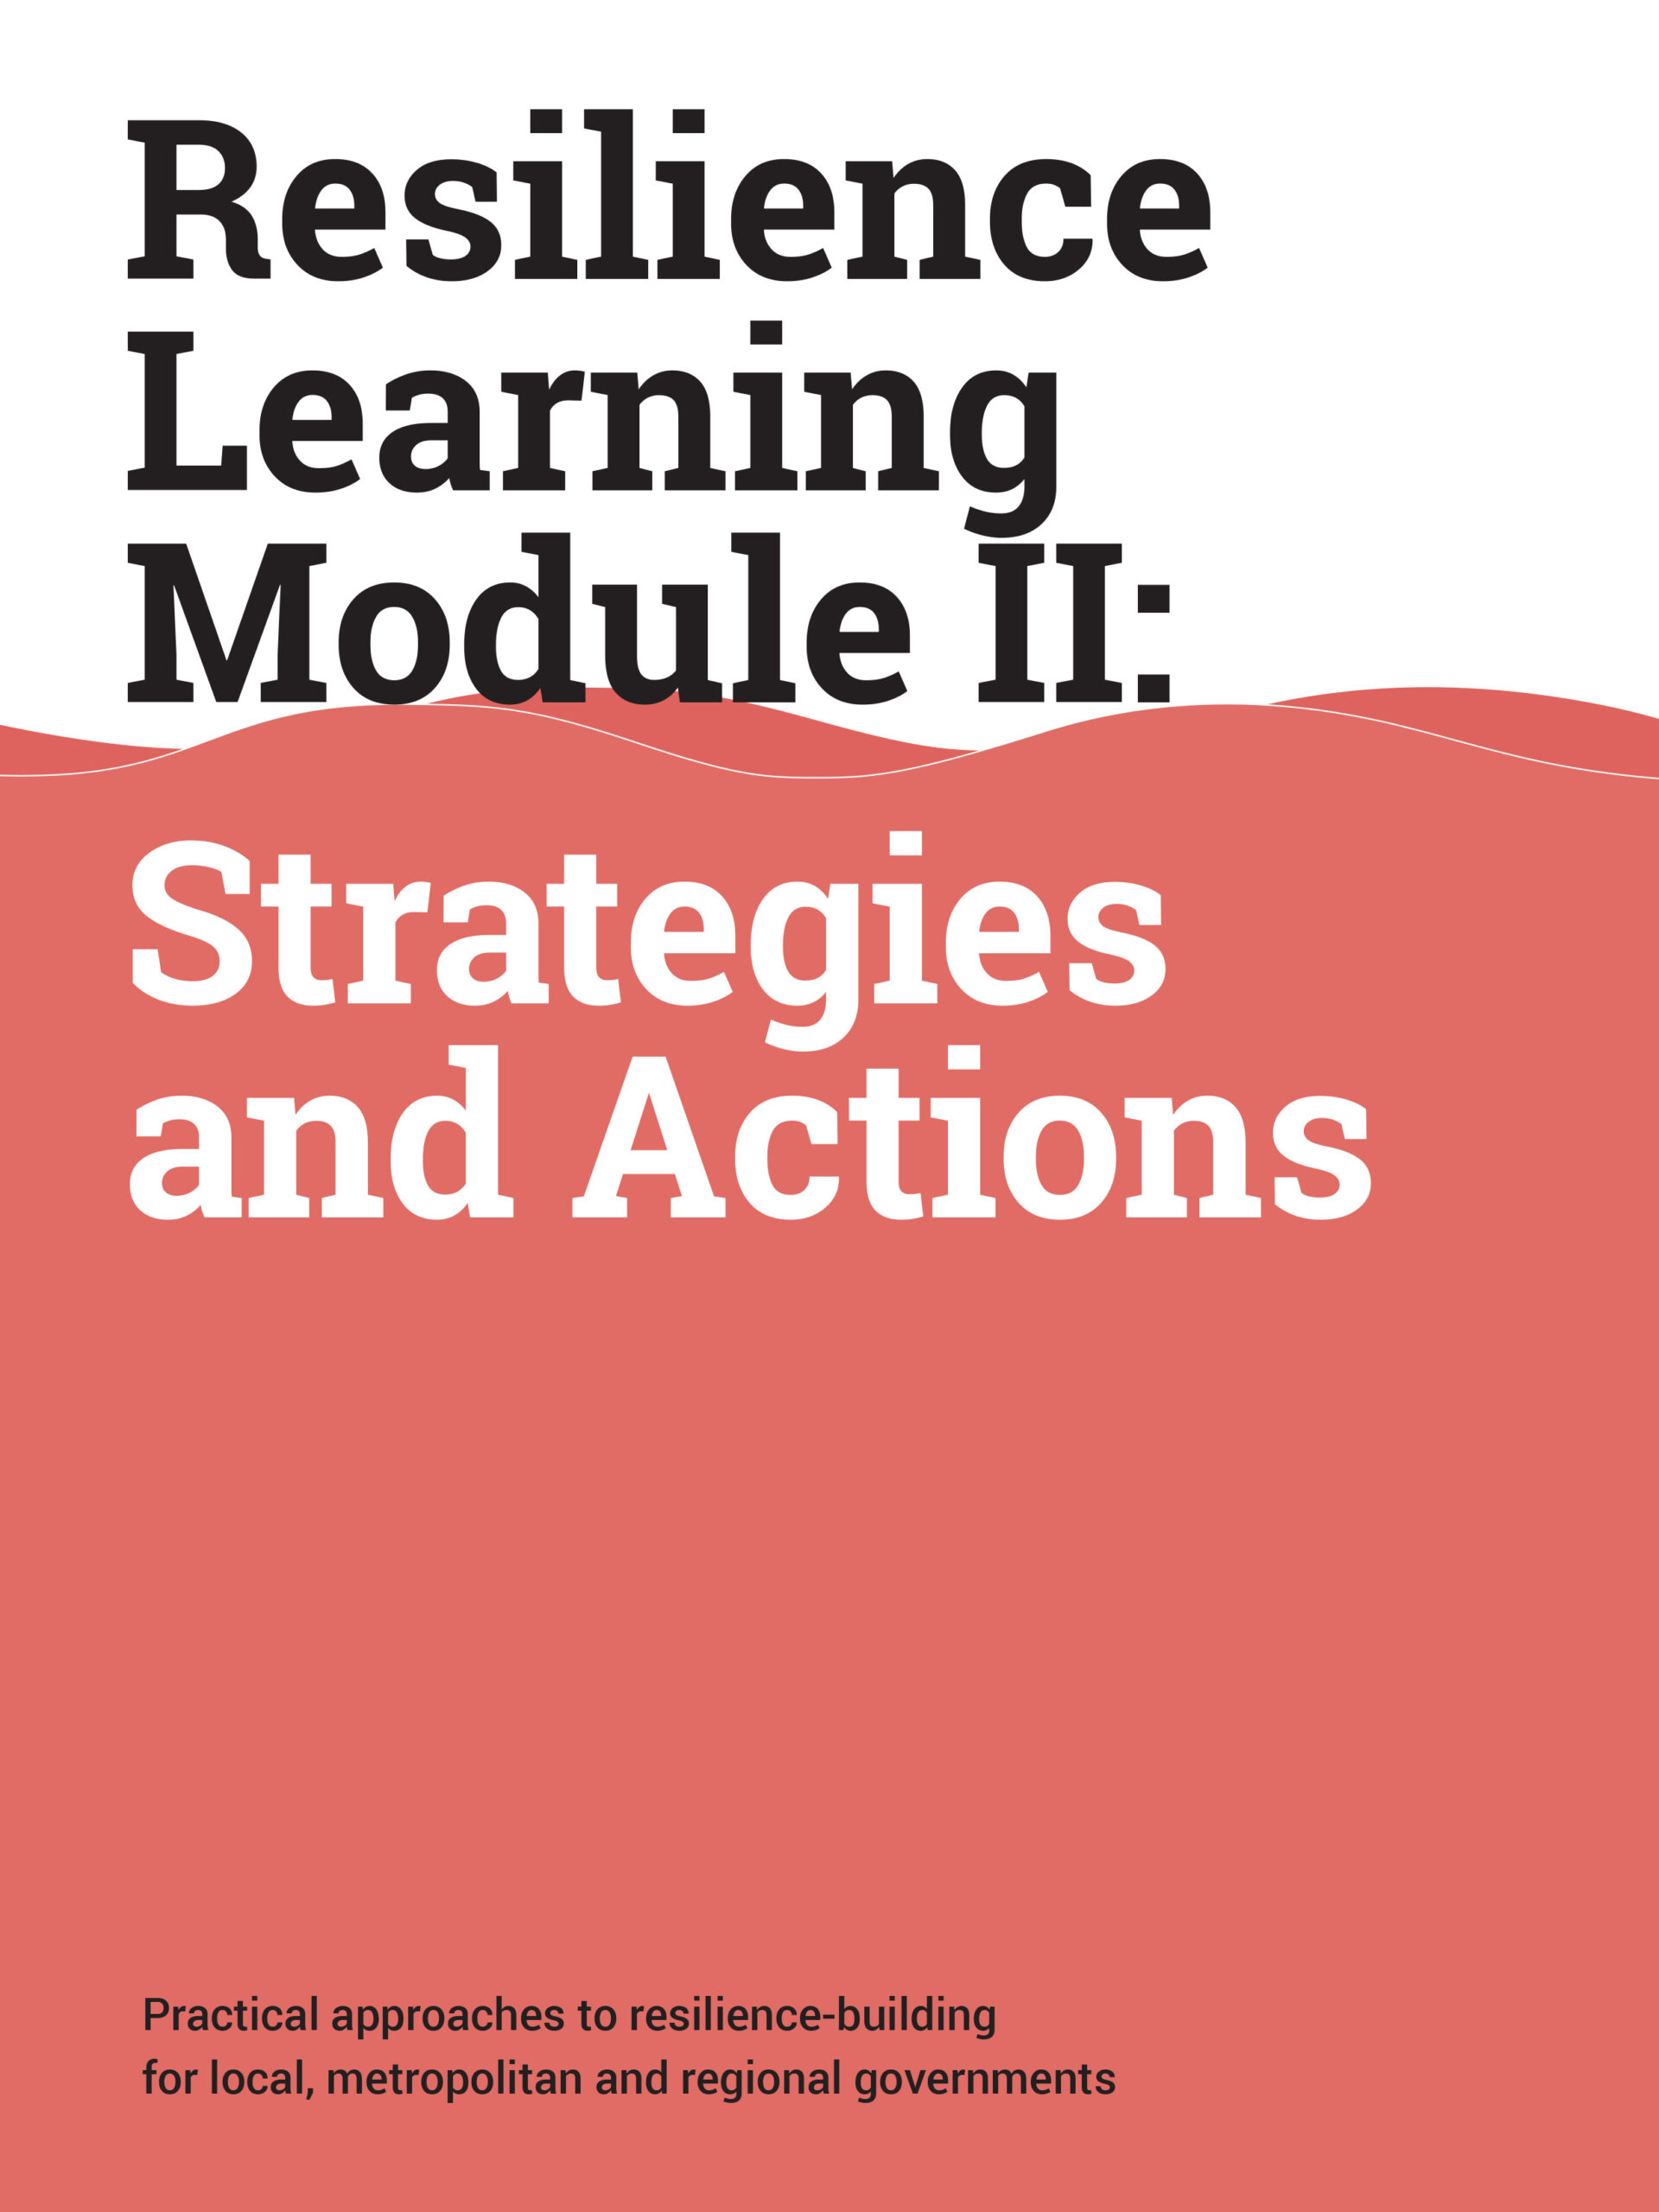 Second Volume of the Resilience Learning Module Launched at the Innovate4Cities Conference